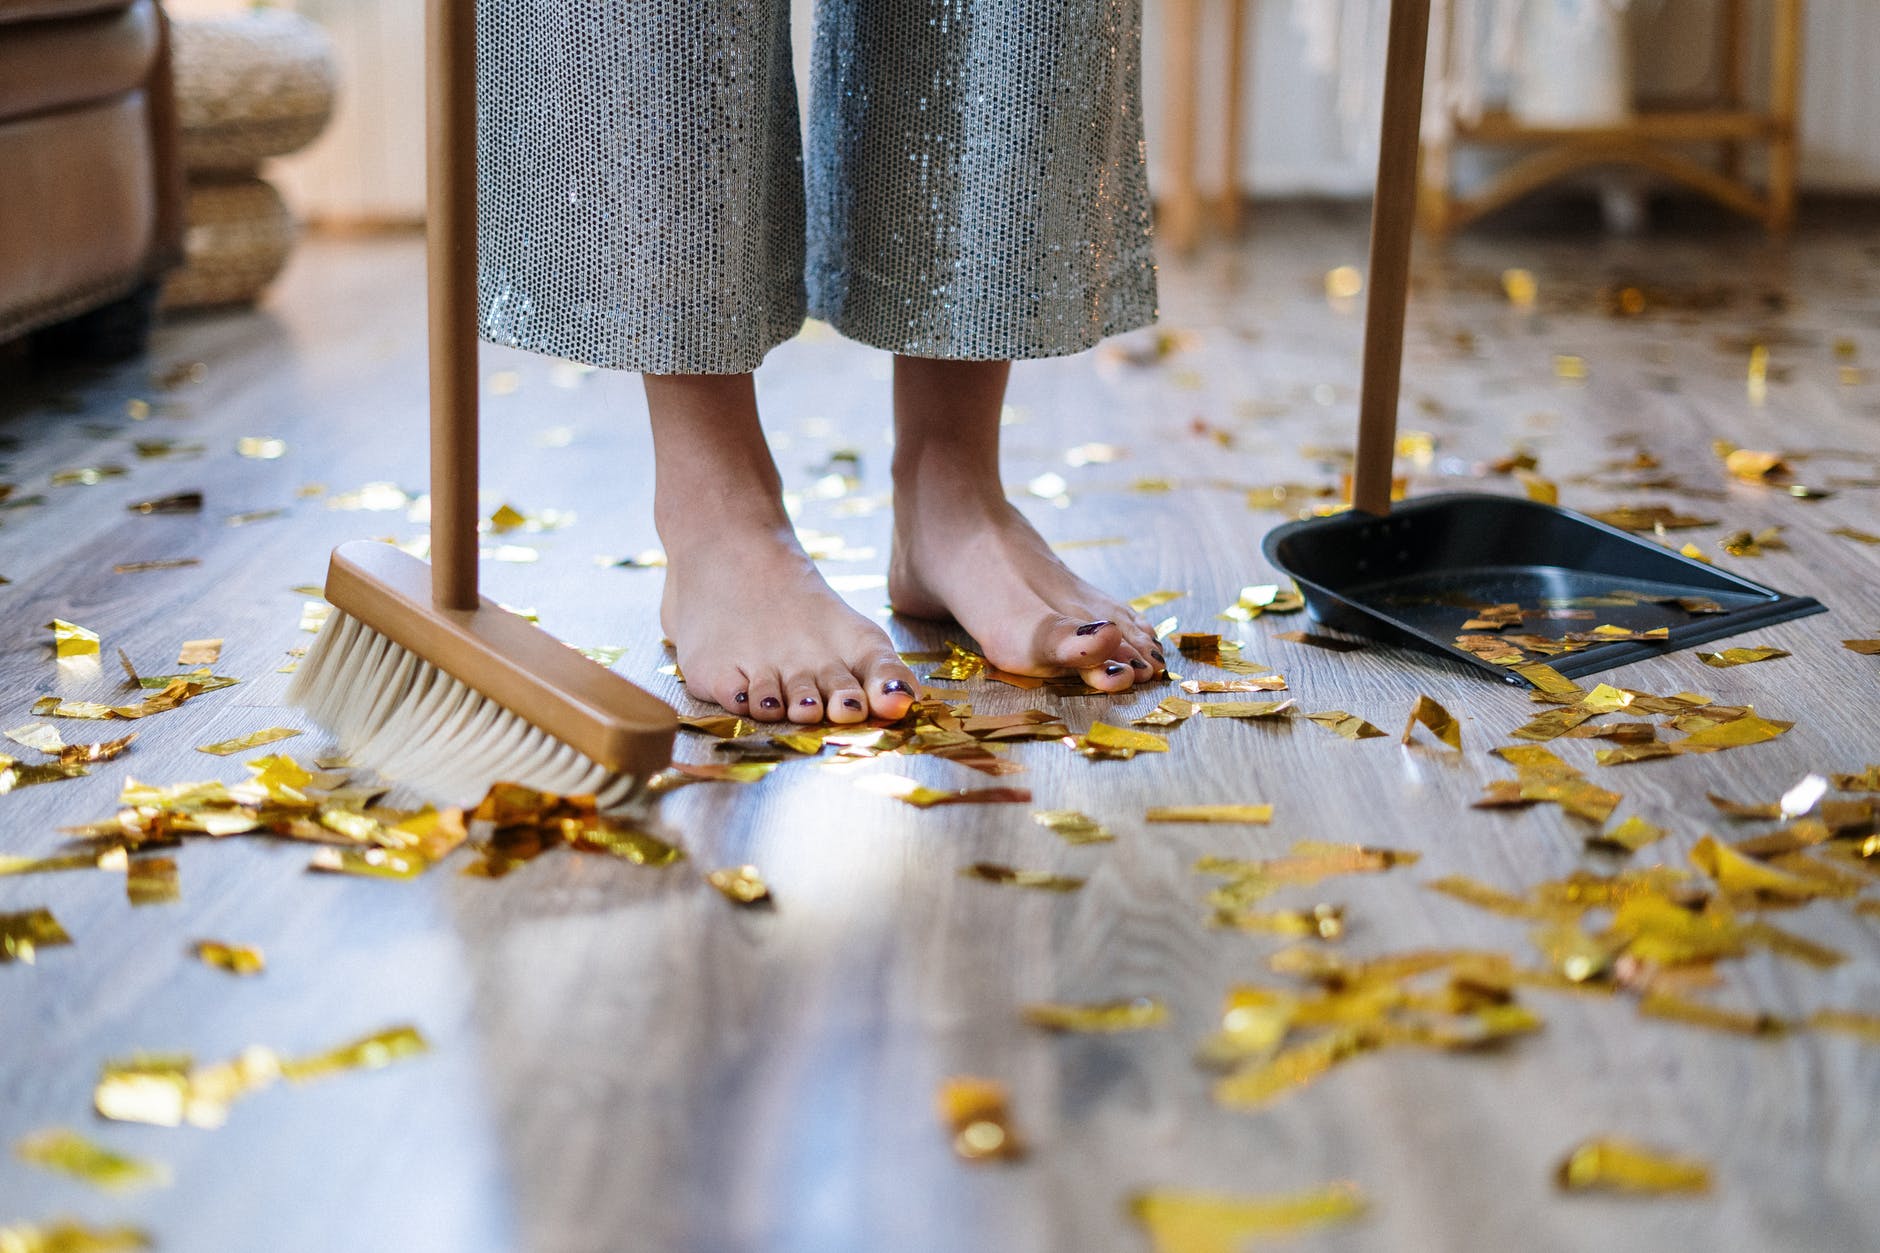 Lizzie was made to do all the house chores | Source: Pexels